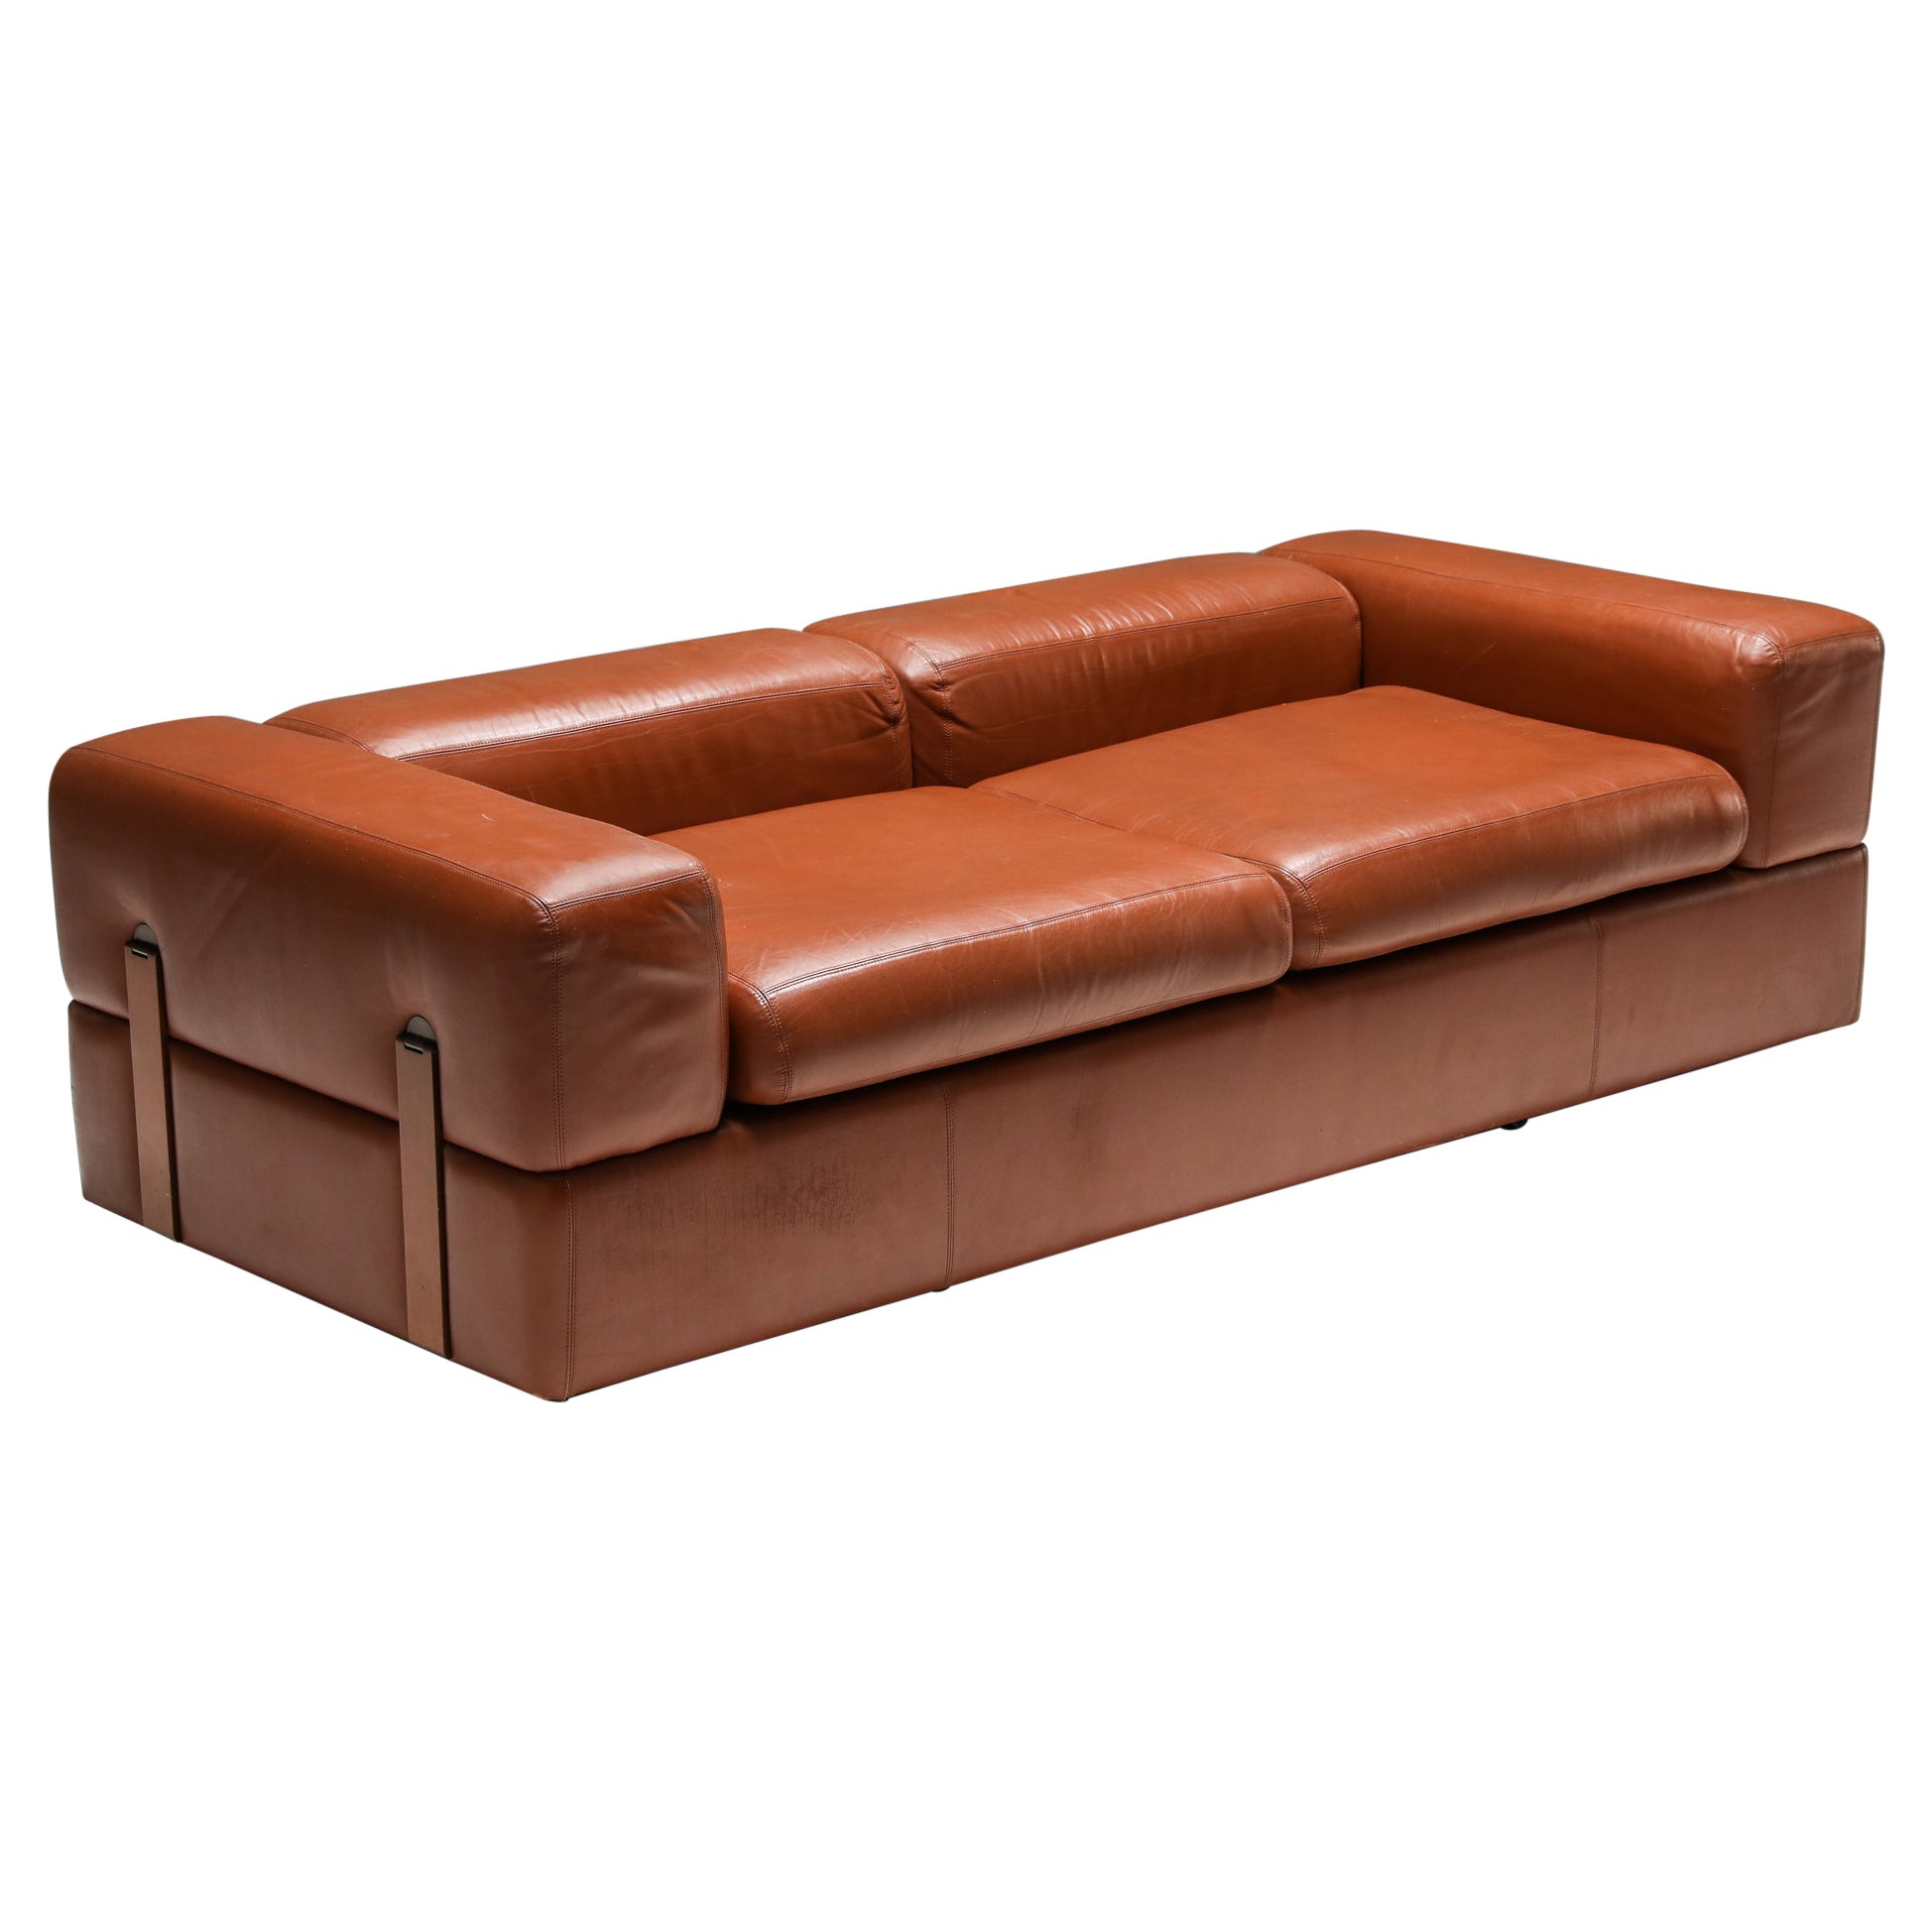 Postmodern Two-Seater Sofa by Tito Agnoli for Cinova in Cognac Leather, 1960's